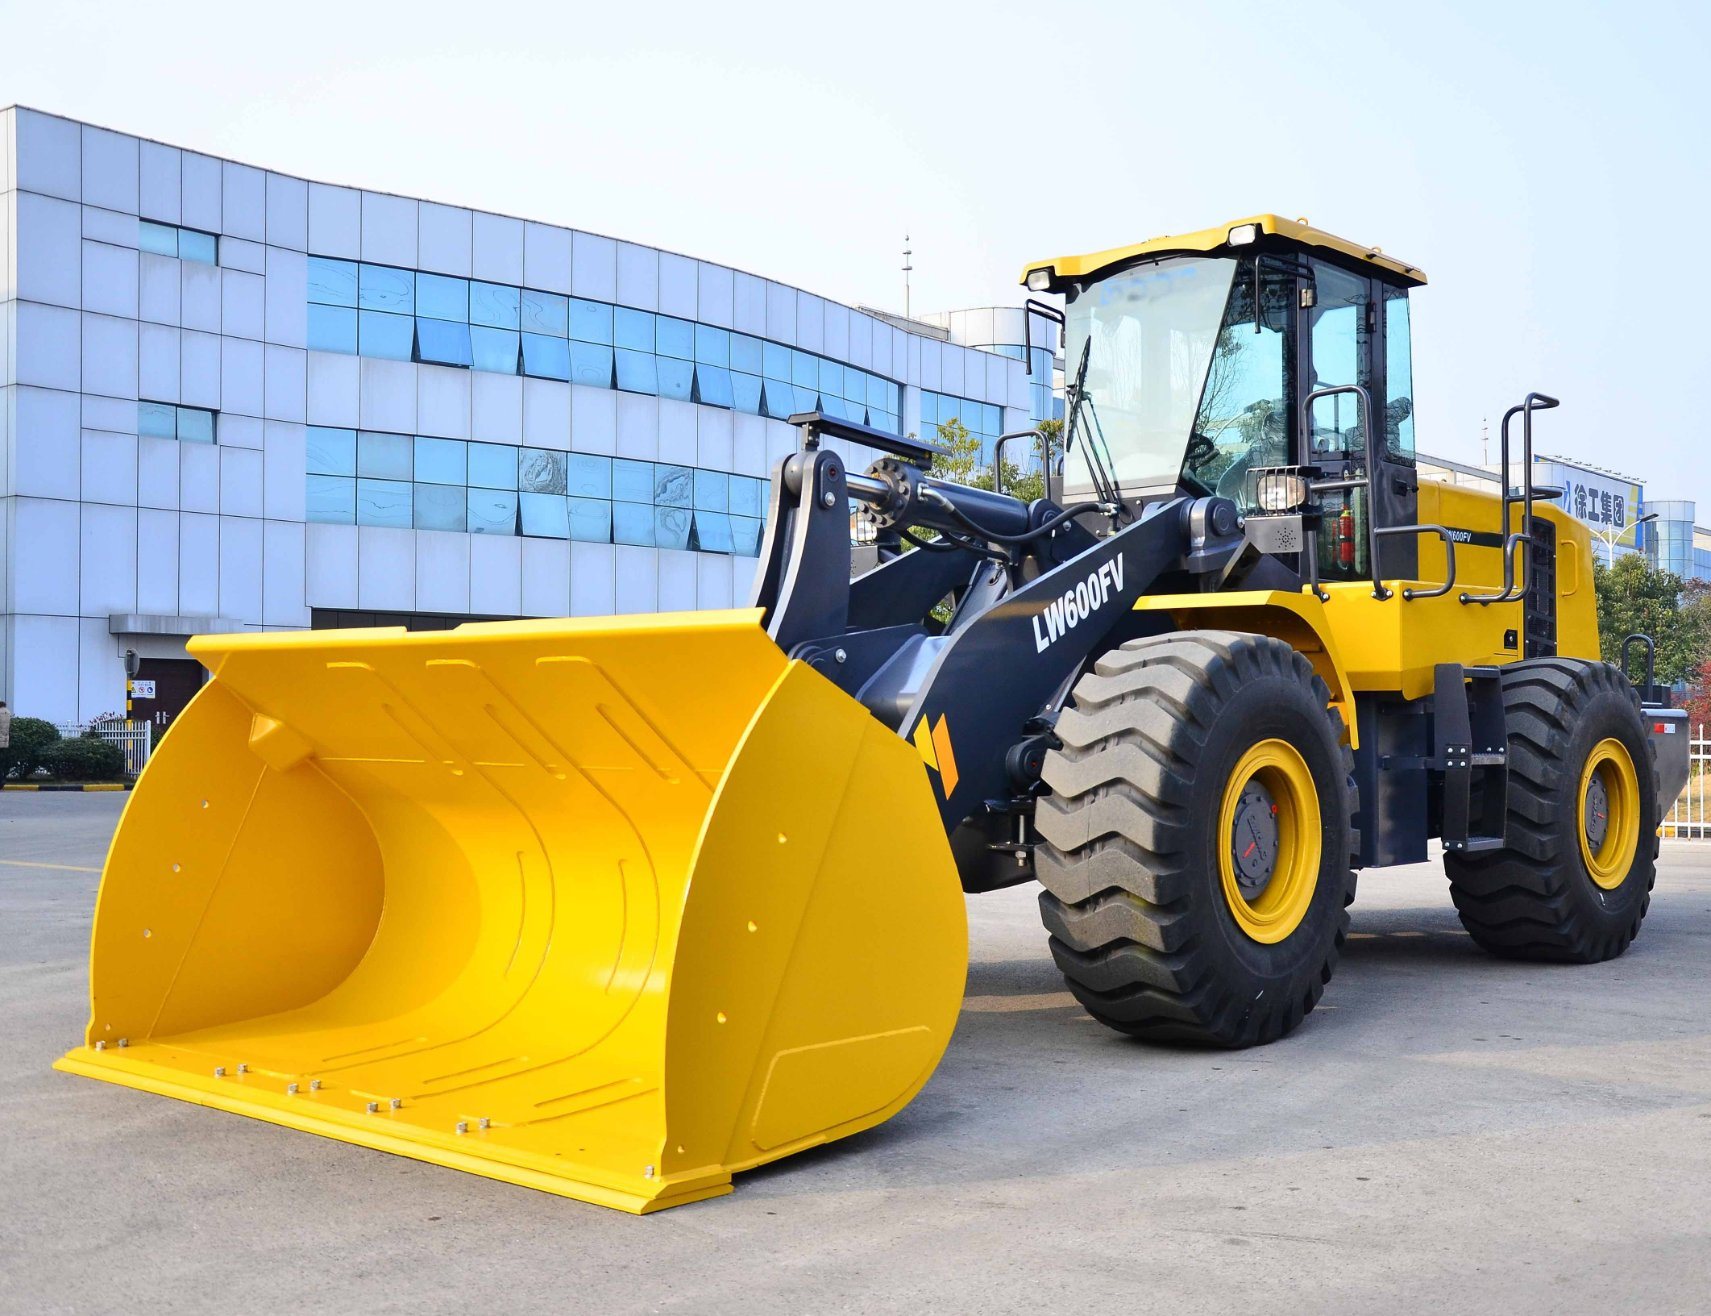 China Famous Brand Factory Supplying Lw600fv Wheel Loader Earth Moving Machinery 6t High Quality